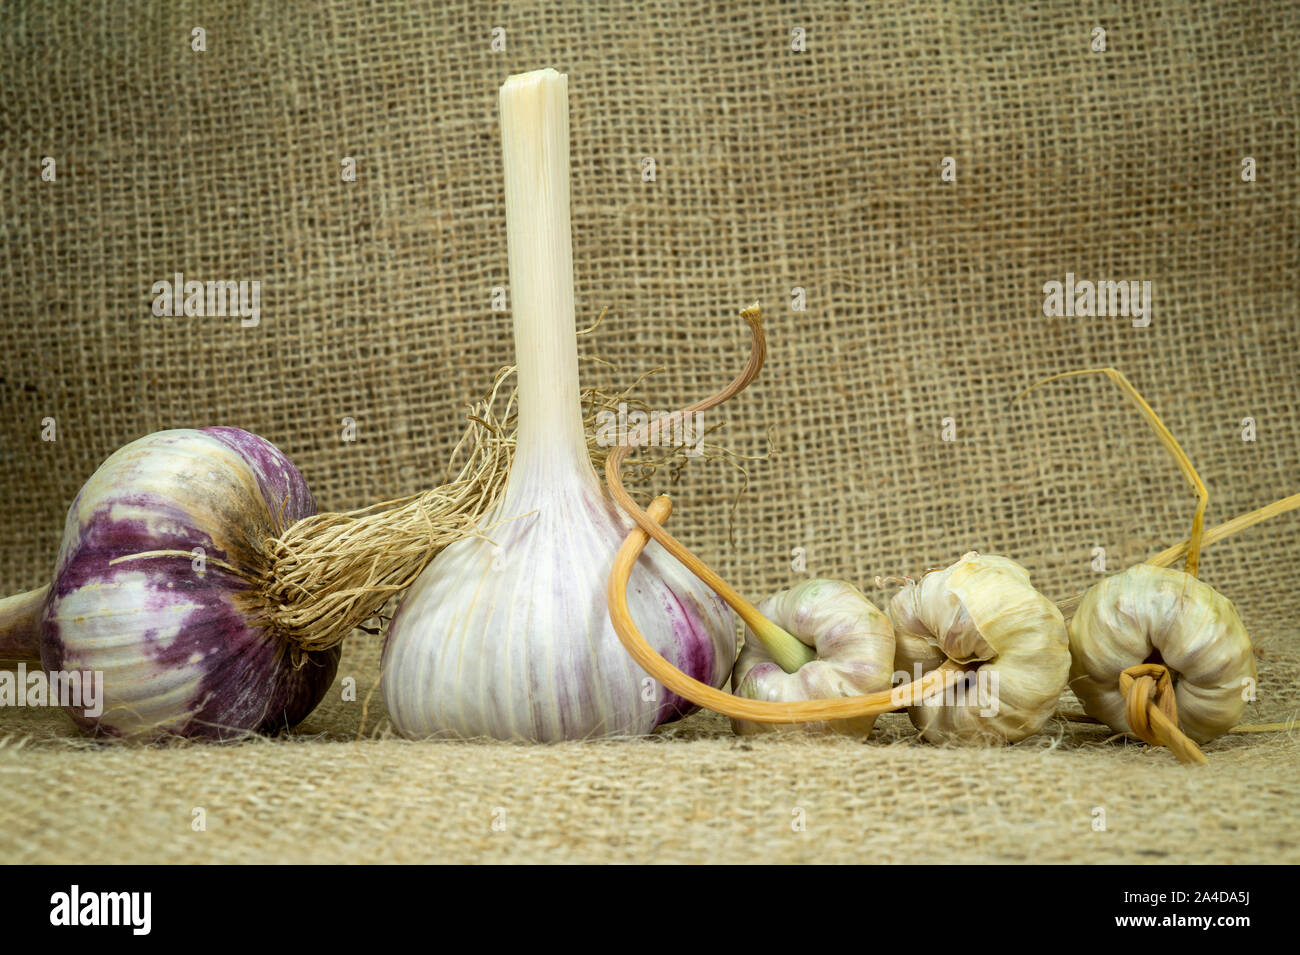 Garlic harvest, bulbs and bulbils on a hessian fabric in a close up view Stock Photo